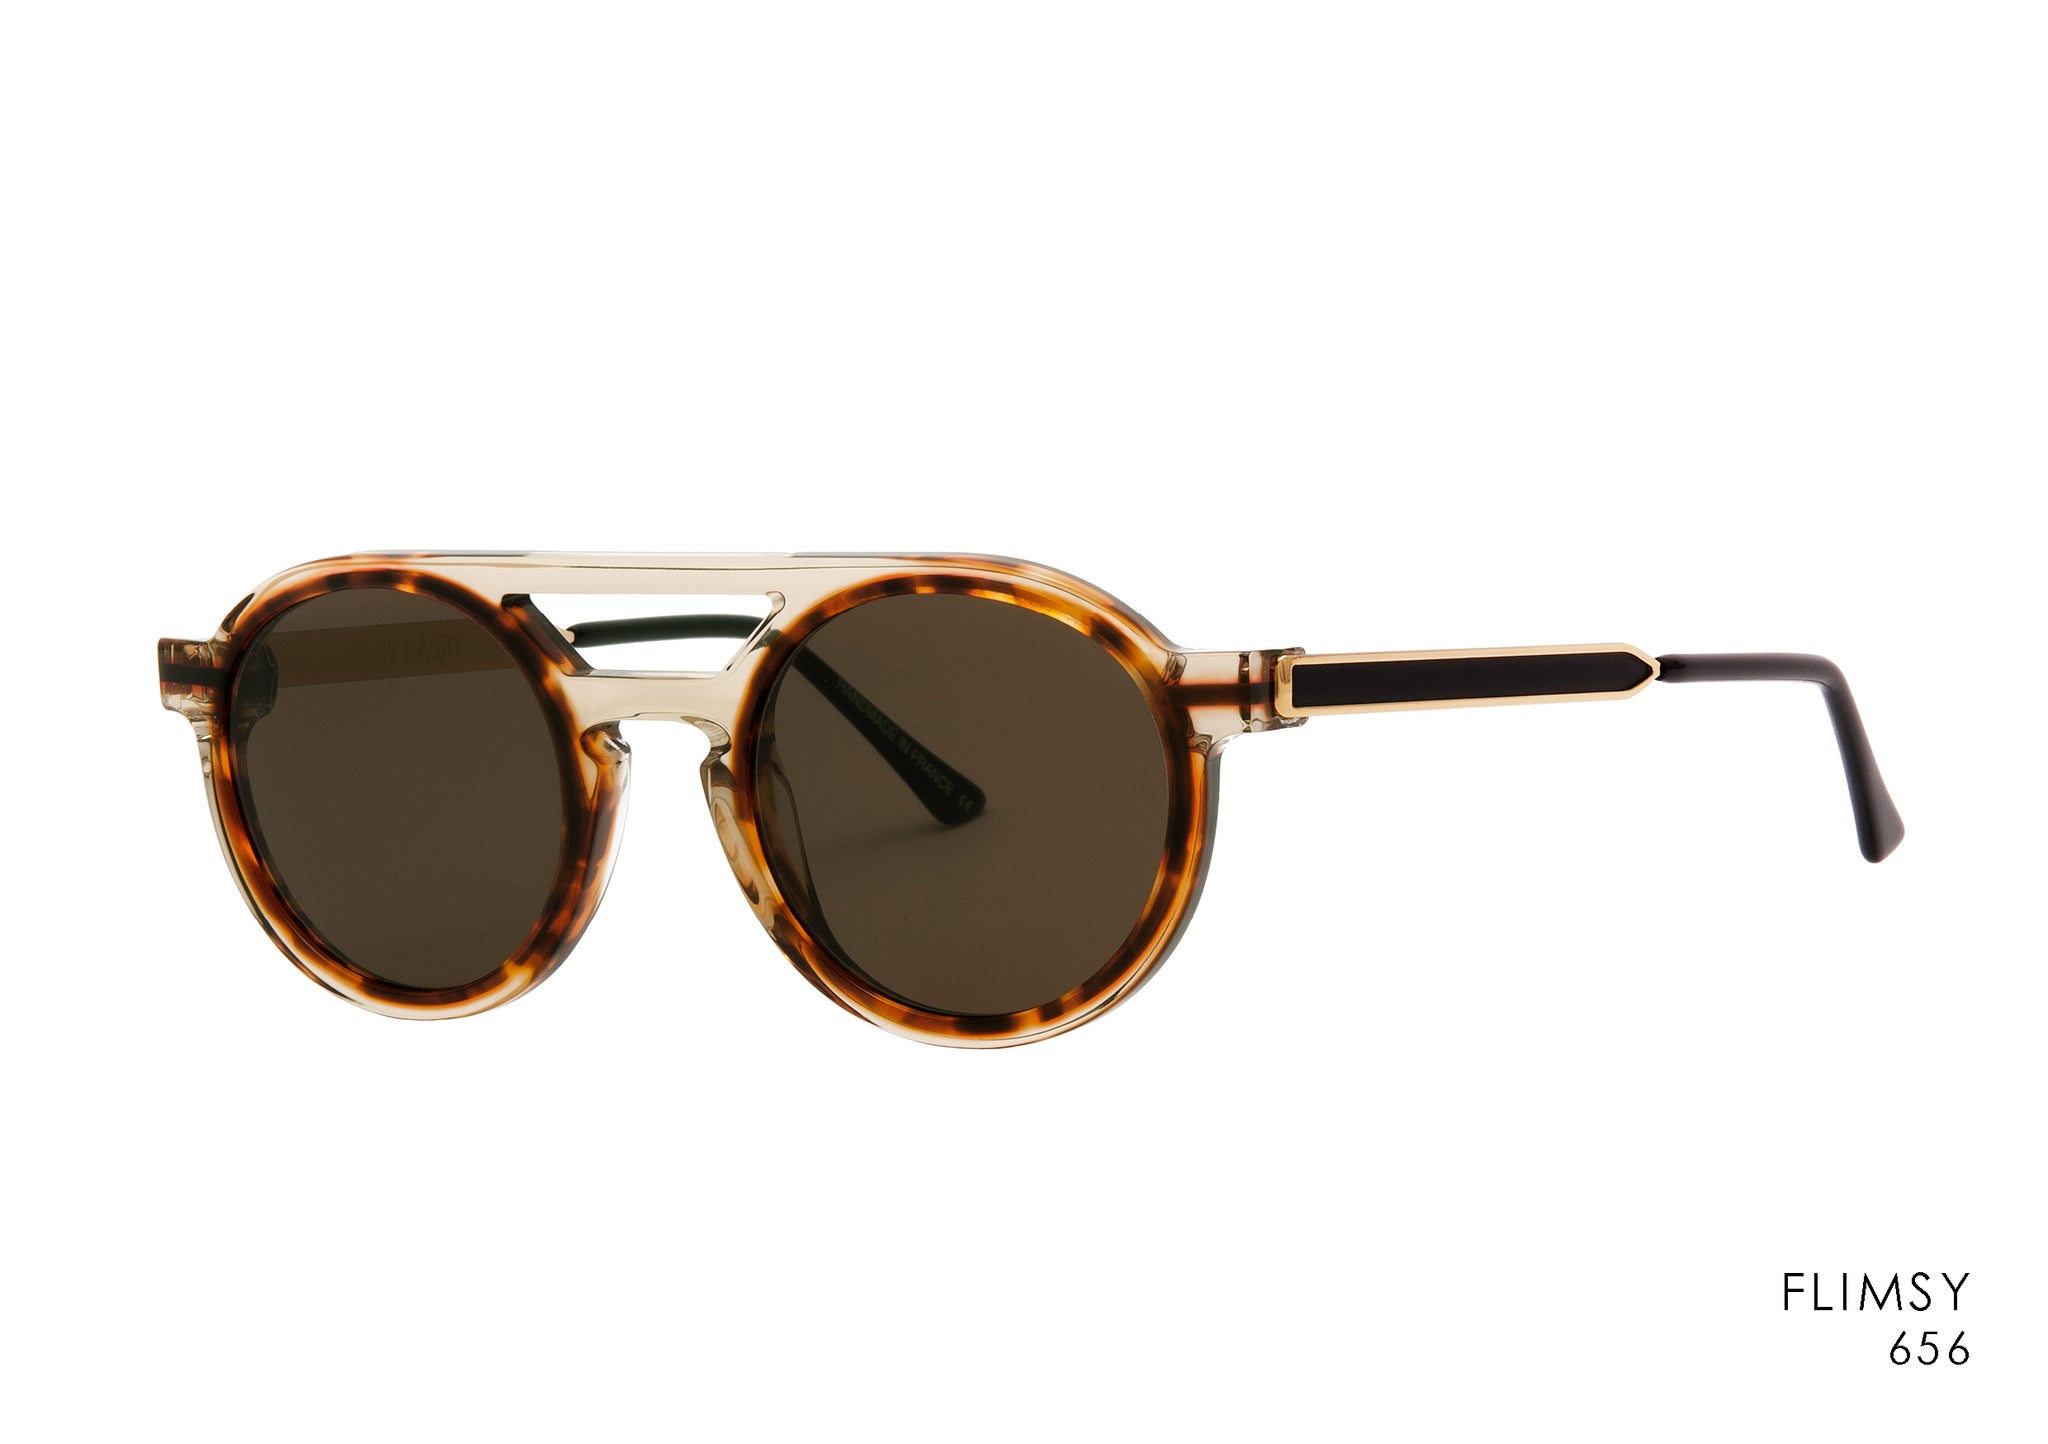 THIERRY LASRY FLIMSY